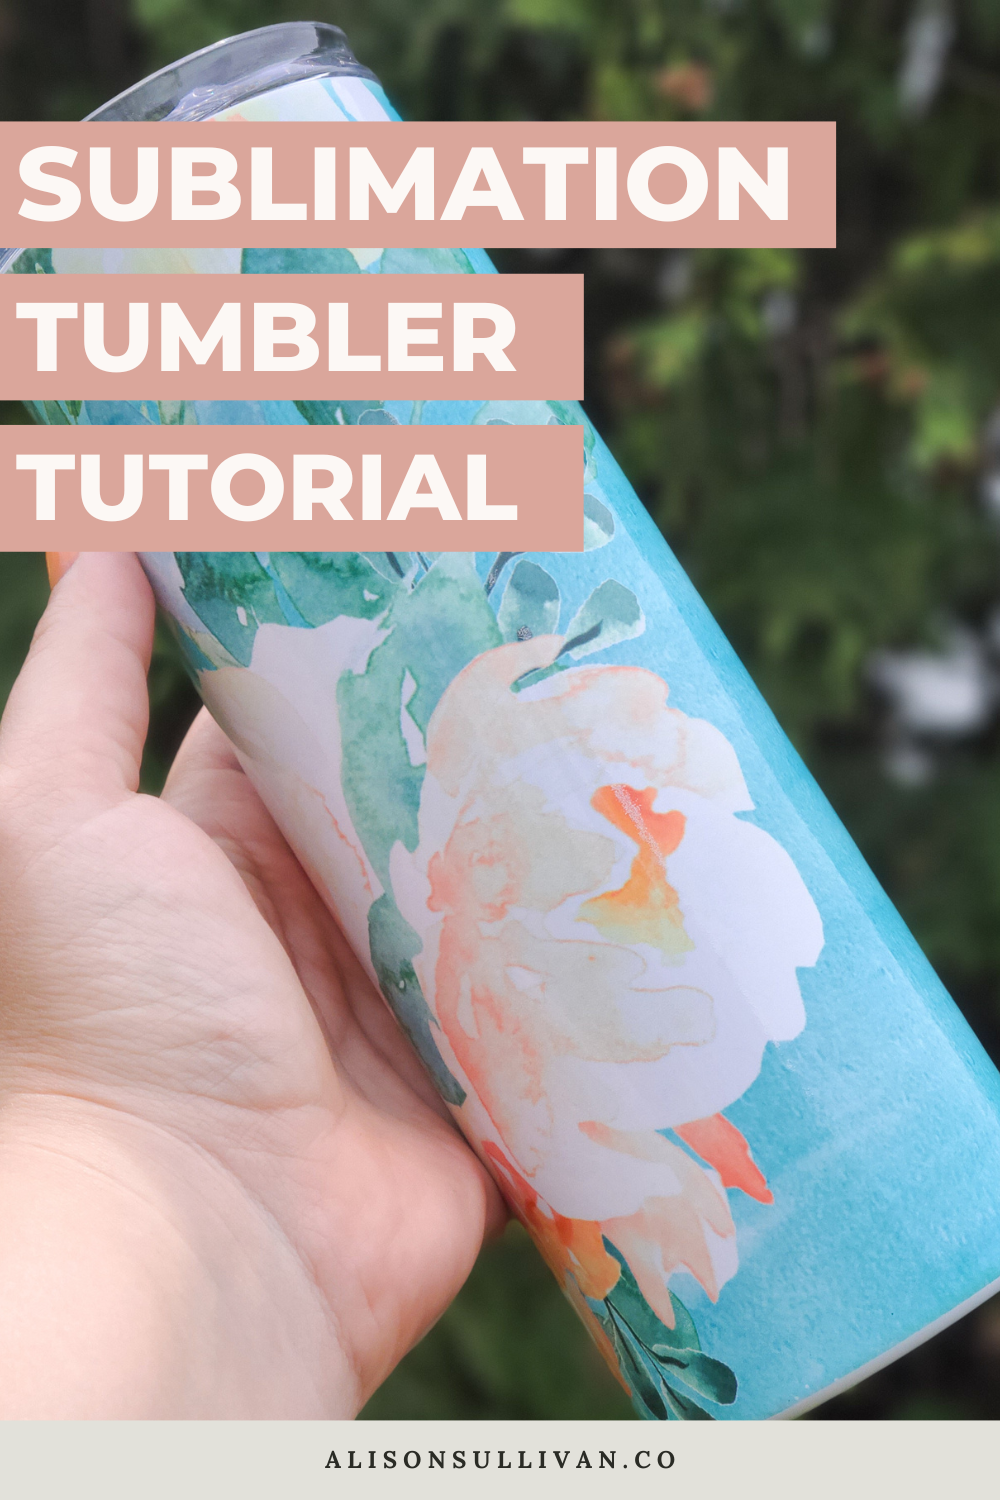 How to Sublimate Tumblers Using a TransPro Mug Press — Alison Crafts